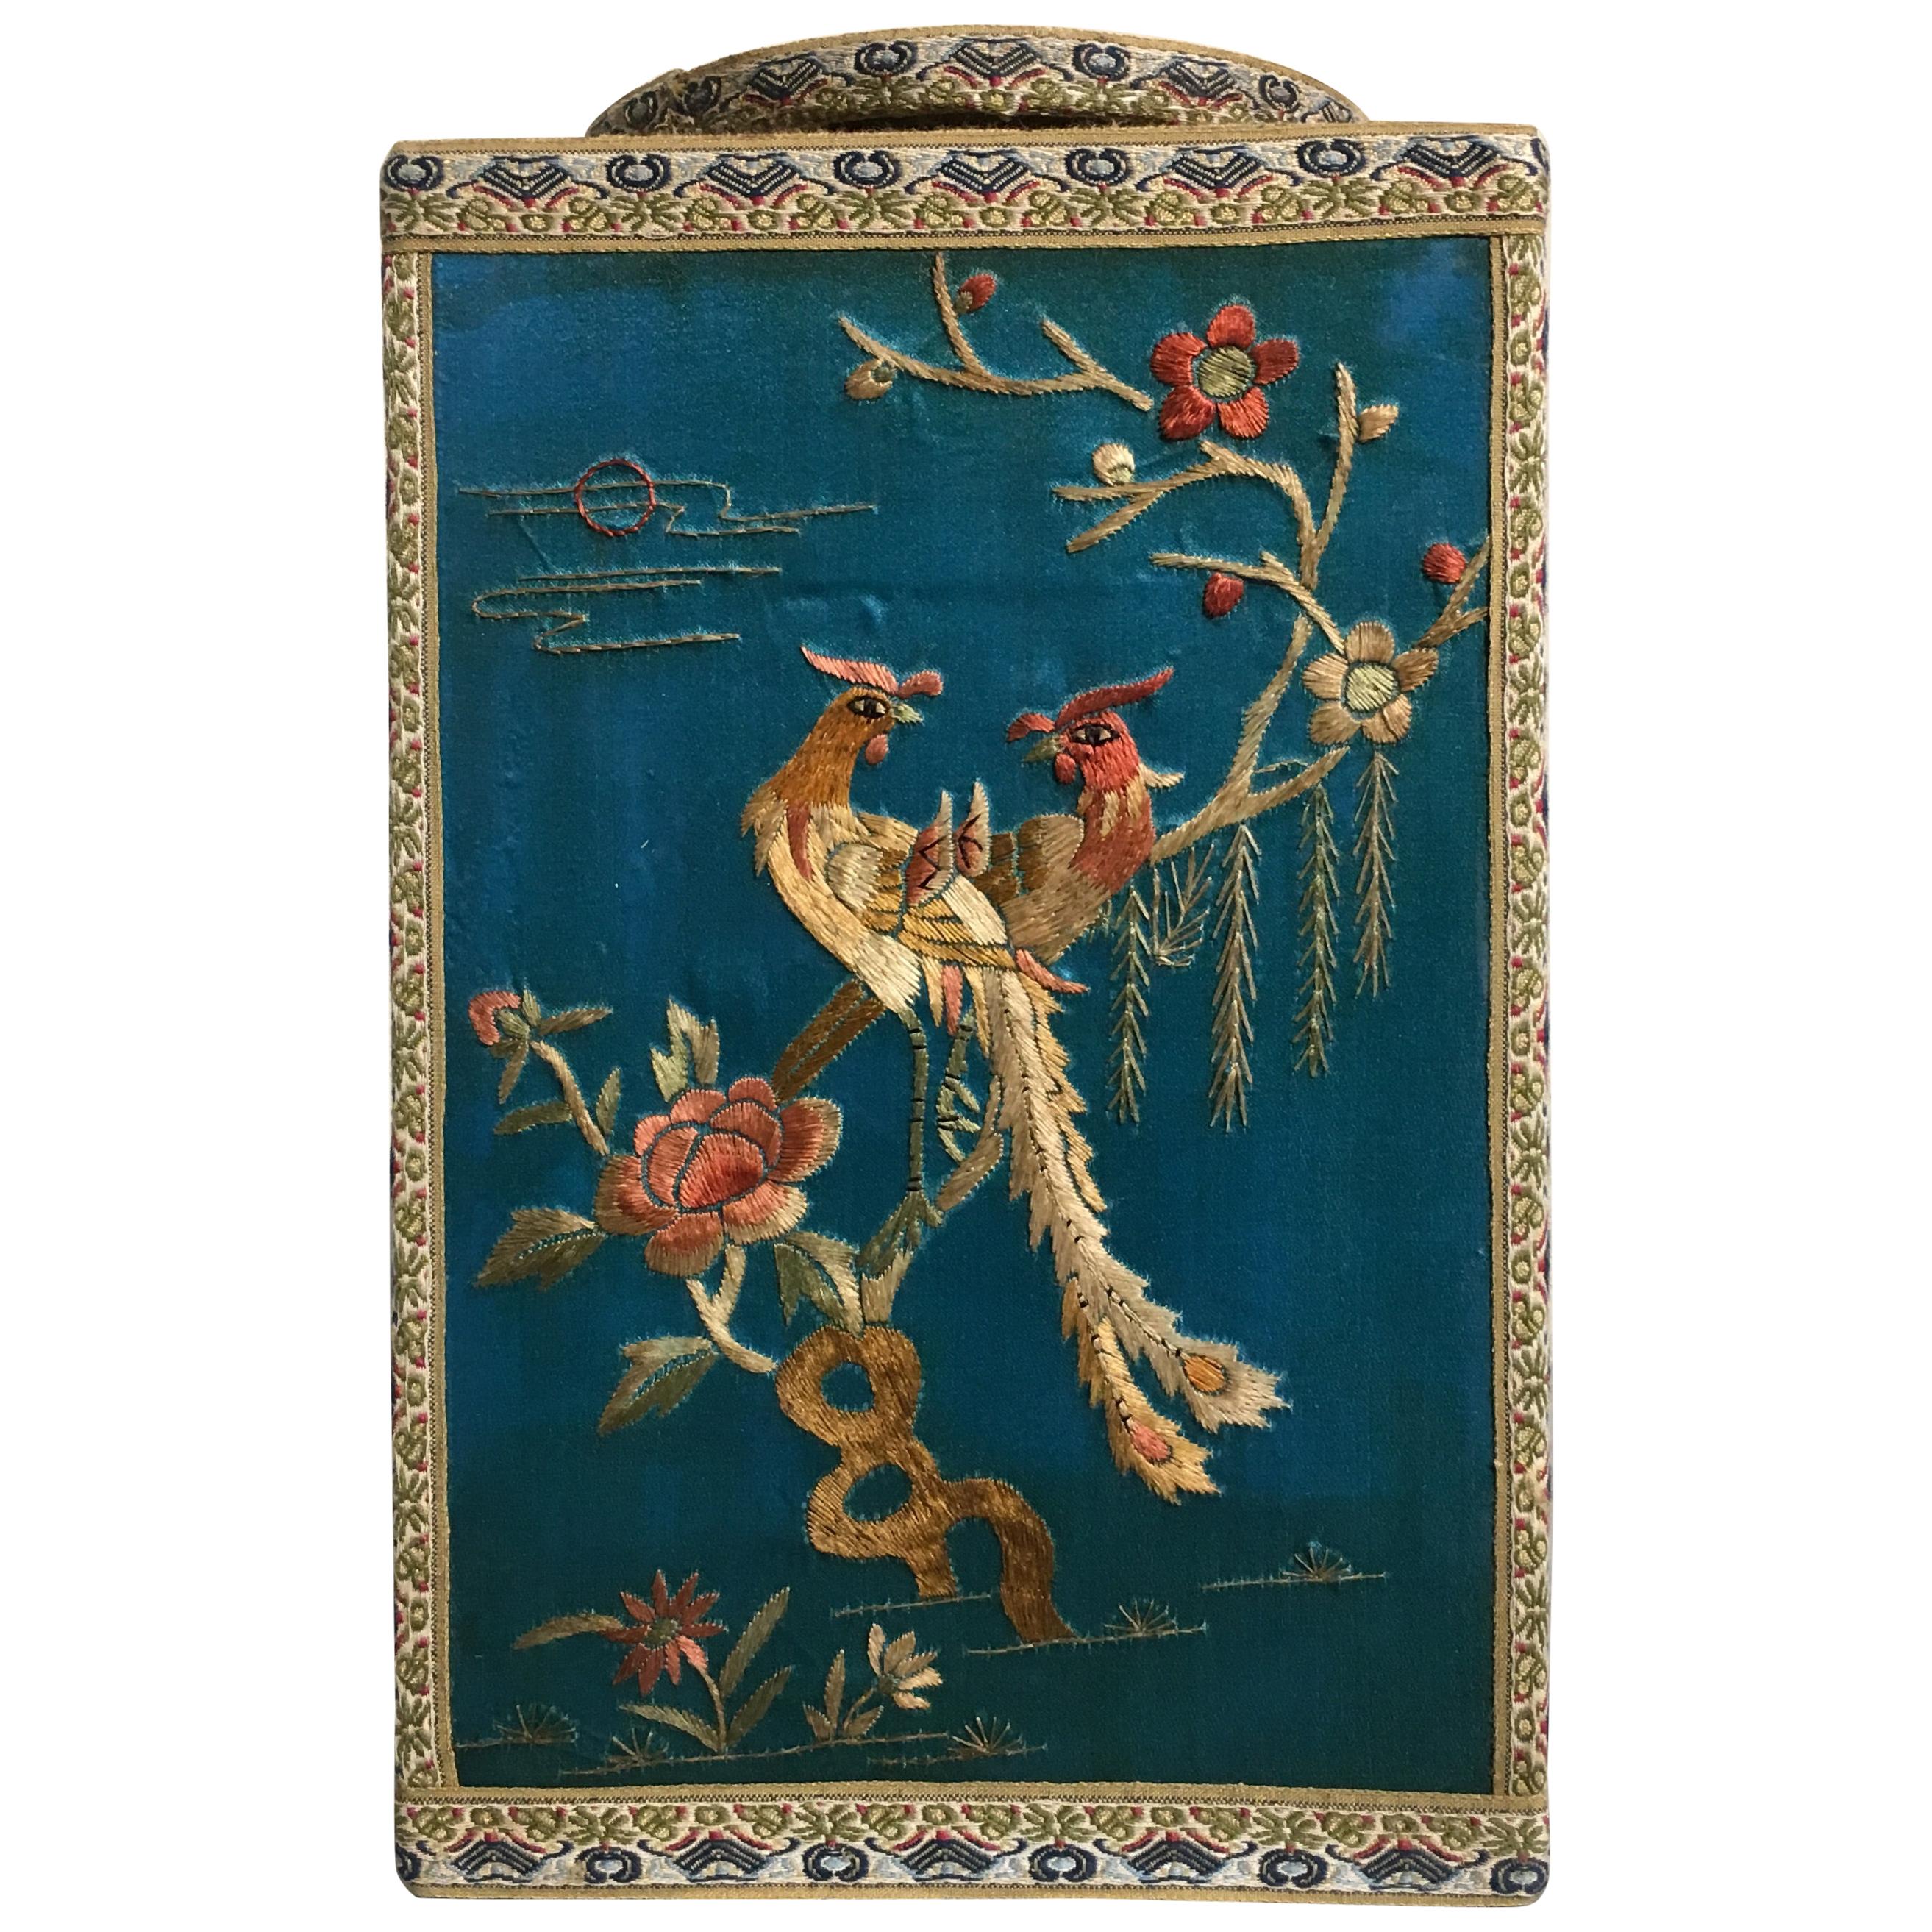 Chinoiserie Turquoise Silk Embroidered Tea Caddy, 1920s, China